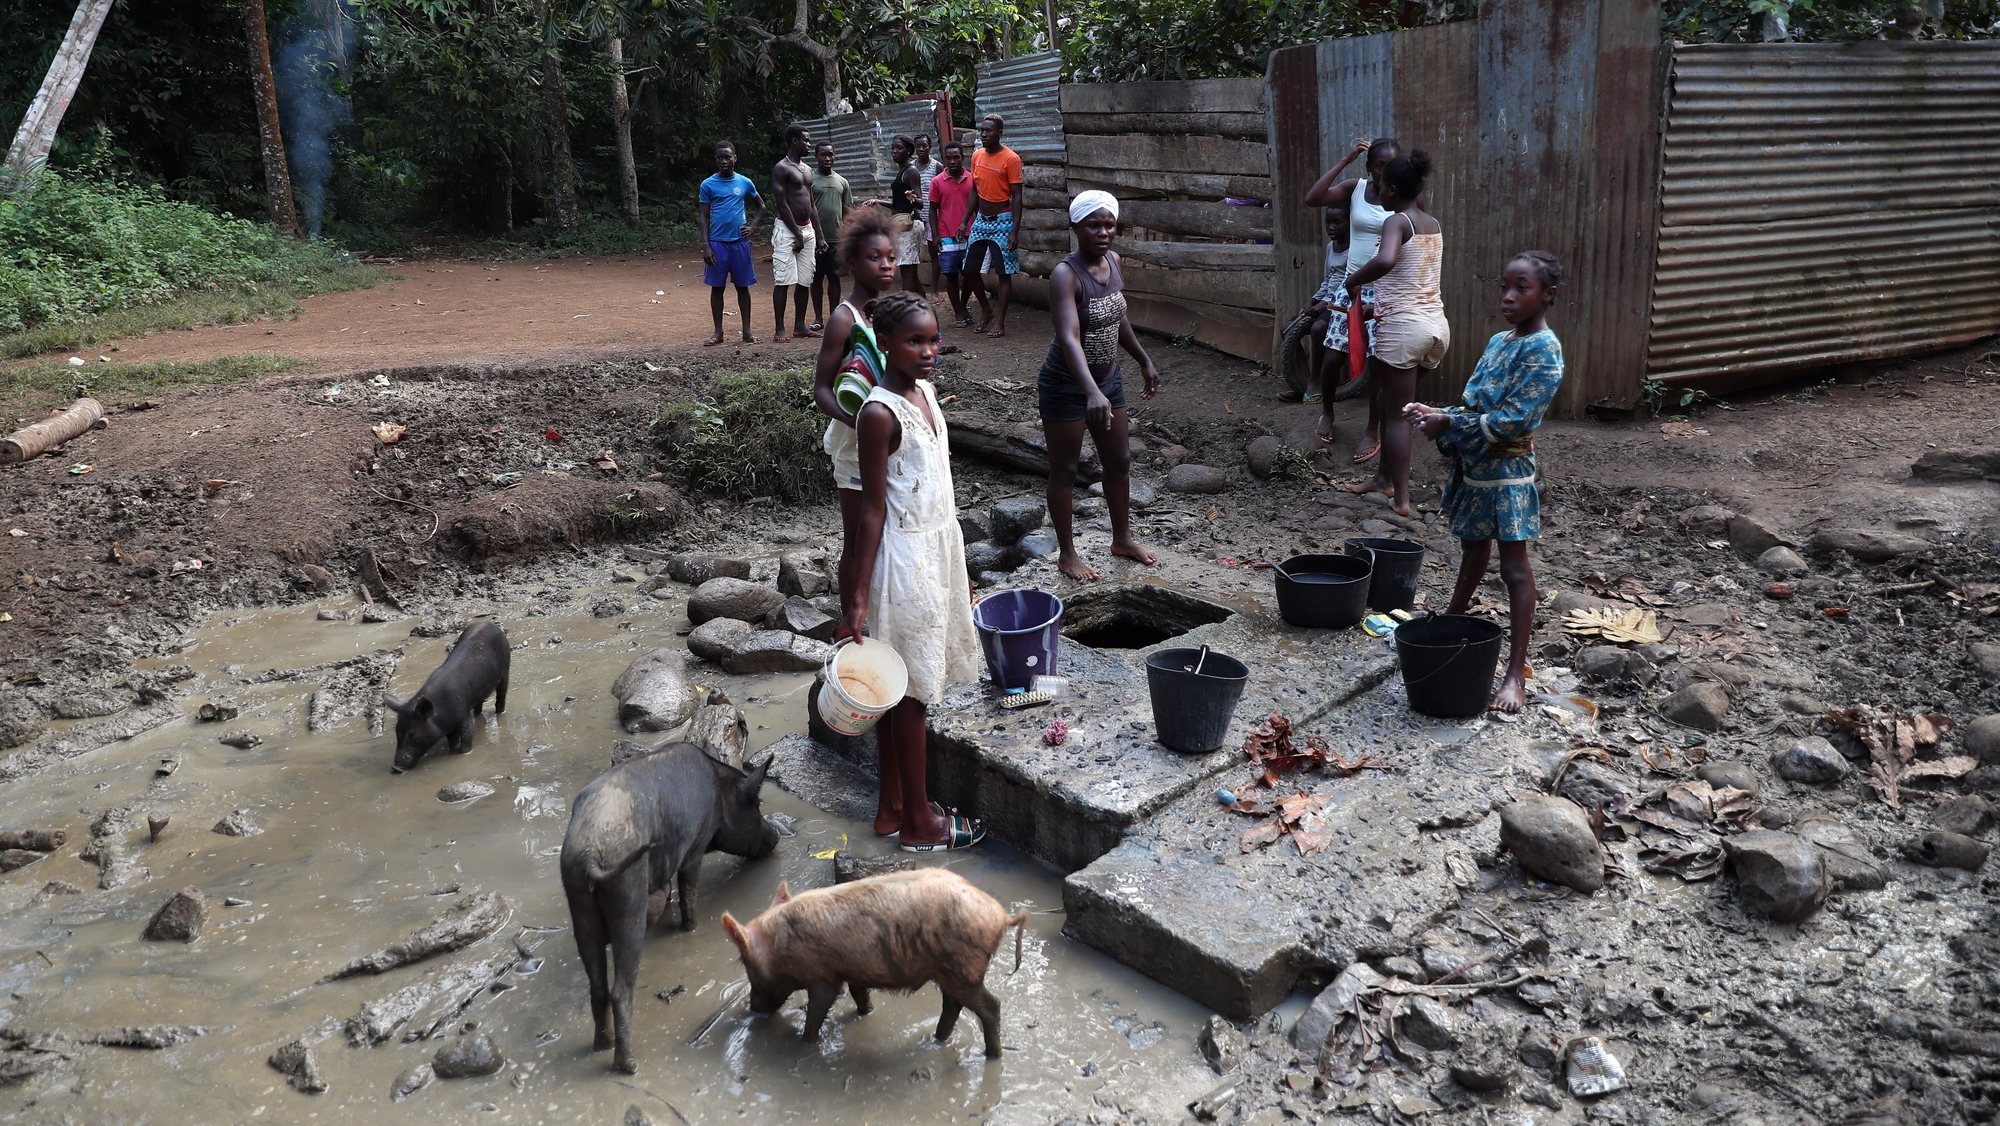 epa09352643 Children draw water for consumption from a spring, as they have no piped water, in Messias Alves Beach, Sao Tome Island, Sao Tome and Principe, 18 July 2021. Inhabitants of Praia Messias Alves, Cantagalo district, carried out an electoral boycott on 18 July, cutting the road, not allowing the ballot boxes to access the planned location, demanding better roads, electricity and piped water. With pieces of scrap metal, sticks and tree branches, the population set up a barricade during the night and prevented access to the polling station, which should have taken place in a tent set up a little further up the road, in a courtyard.  EPA/NUNO VEIGA